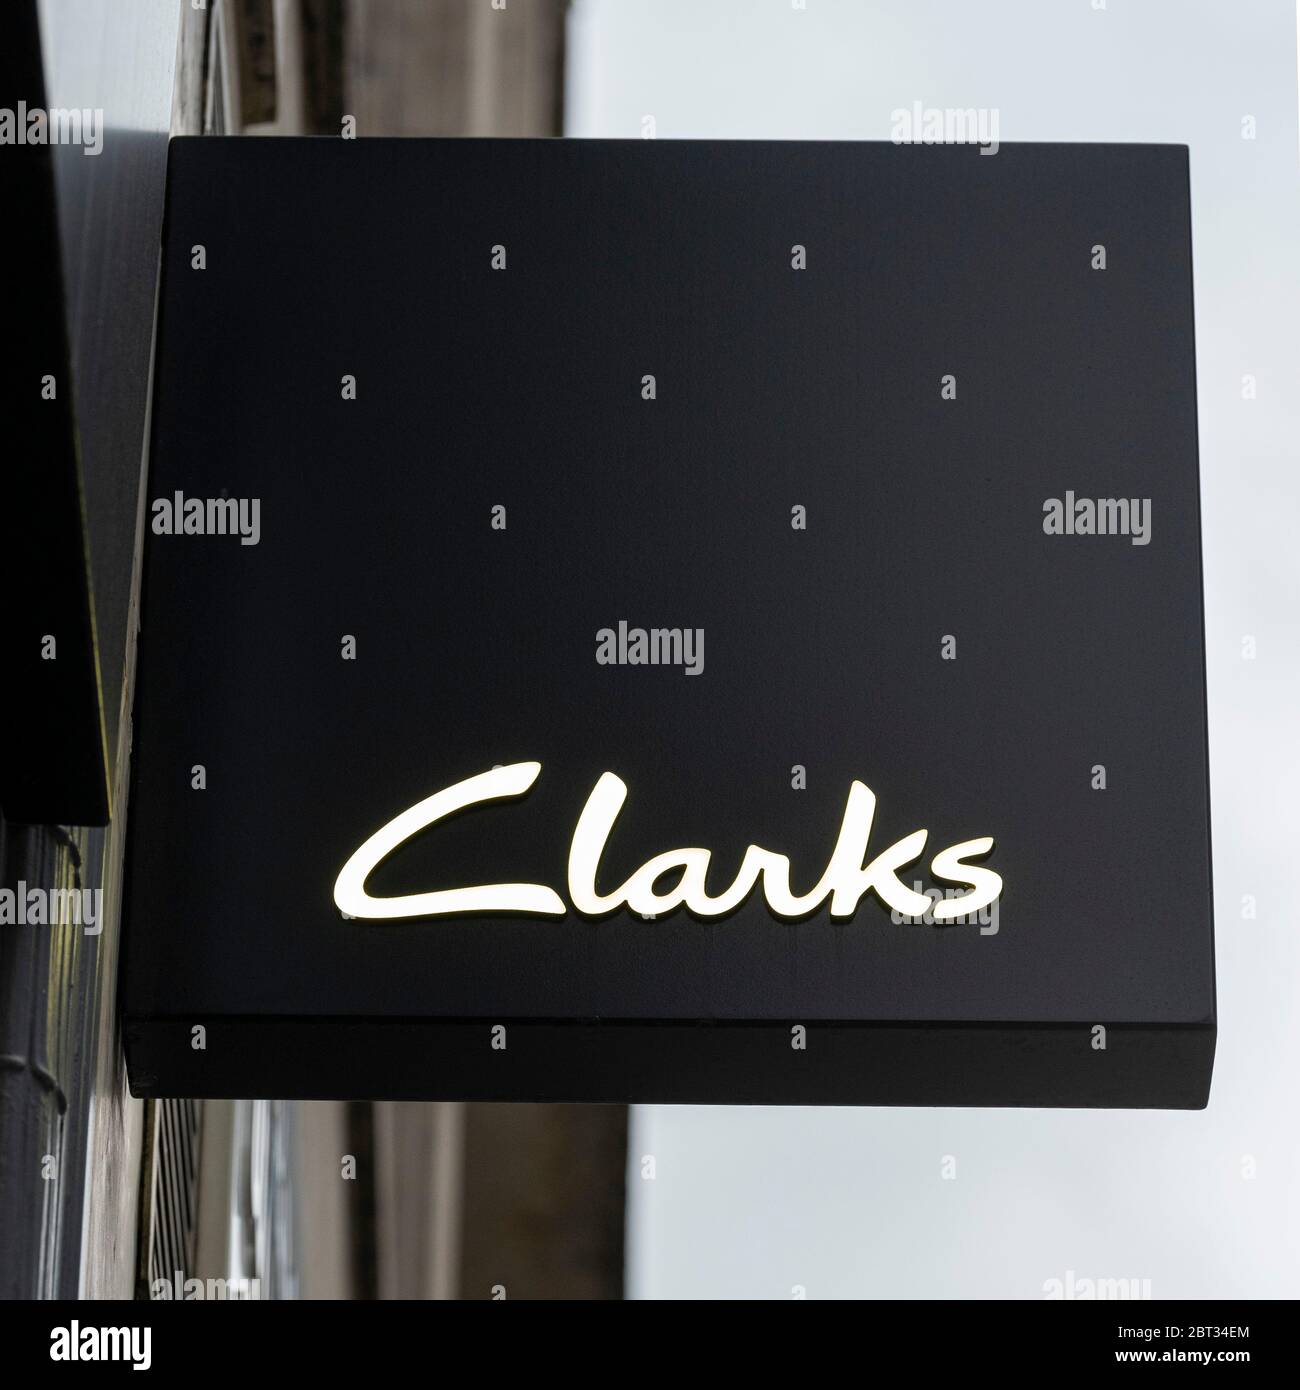 clarks shoes oxford street